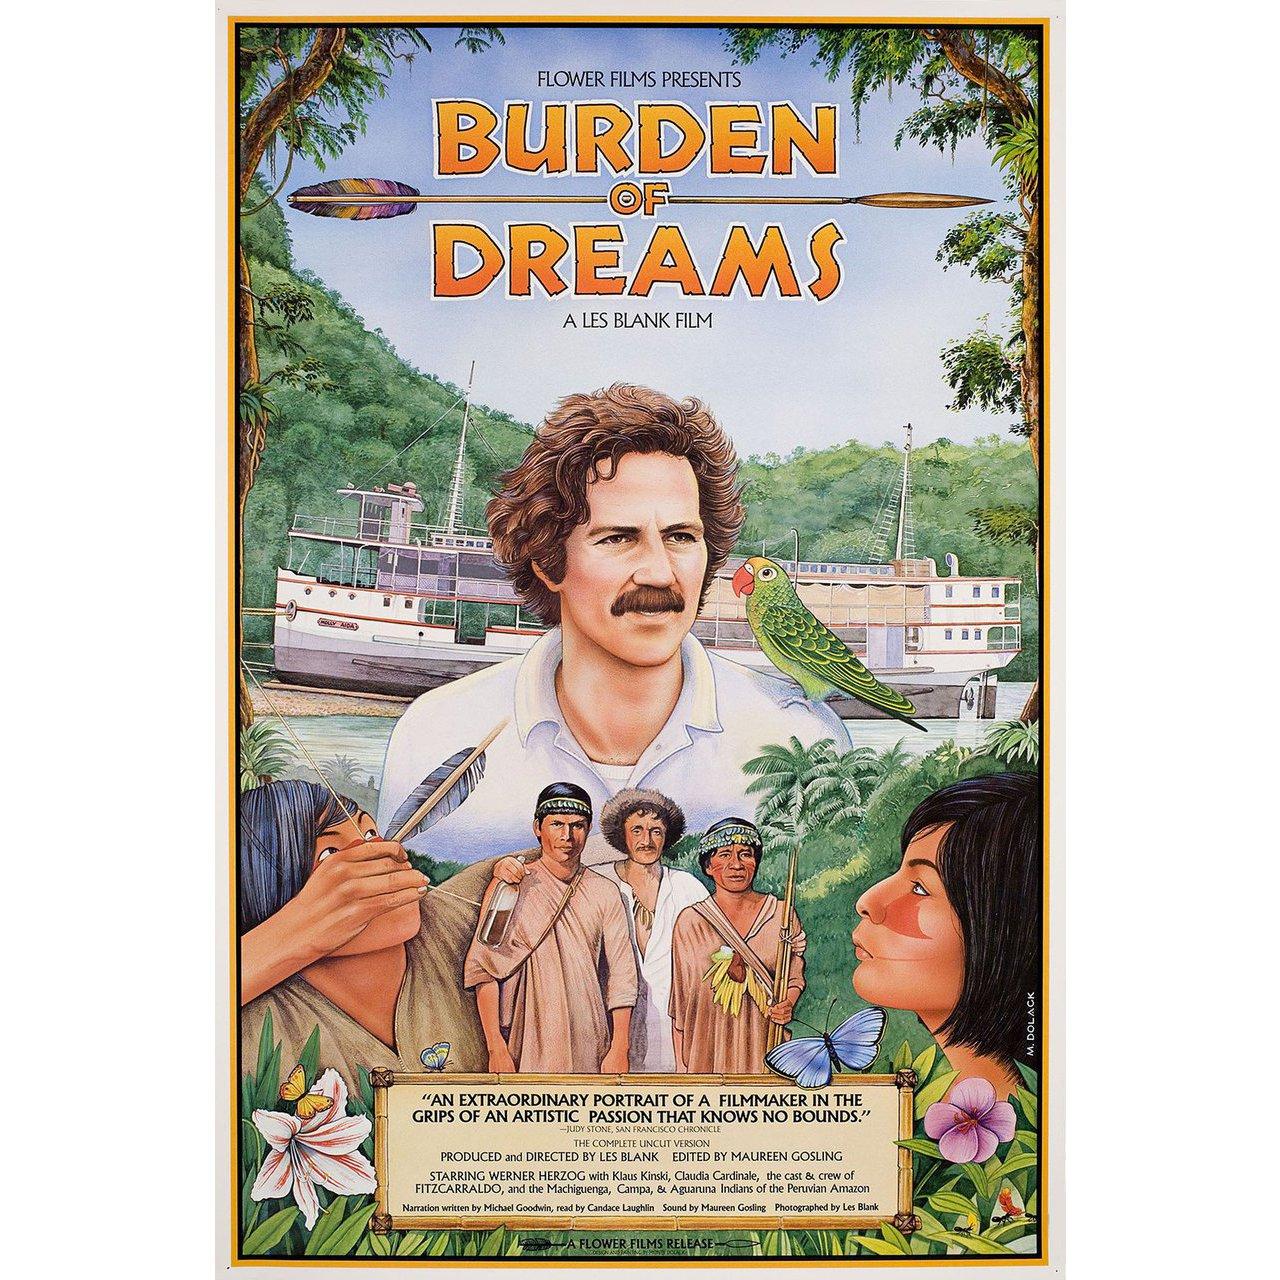 Original 1982 U.S. poster by Monte Dolack for the documentary film 'Burden of Dreams' directed by Les Blank with Werner Herzog / Klaus Kinski / Claudia Cardinale / Jason Robards. Fine condition, rolled. Please note: the size is stated in inches and